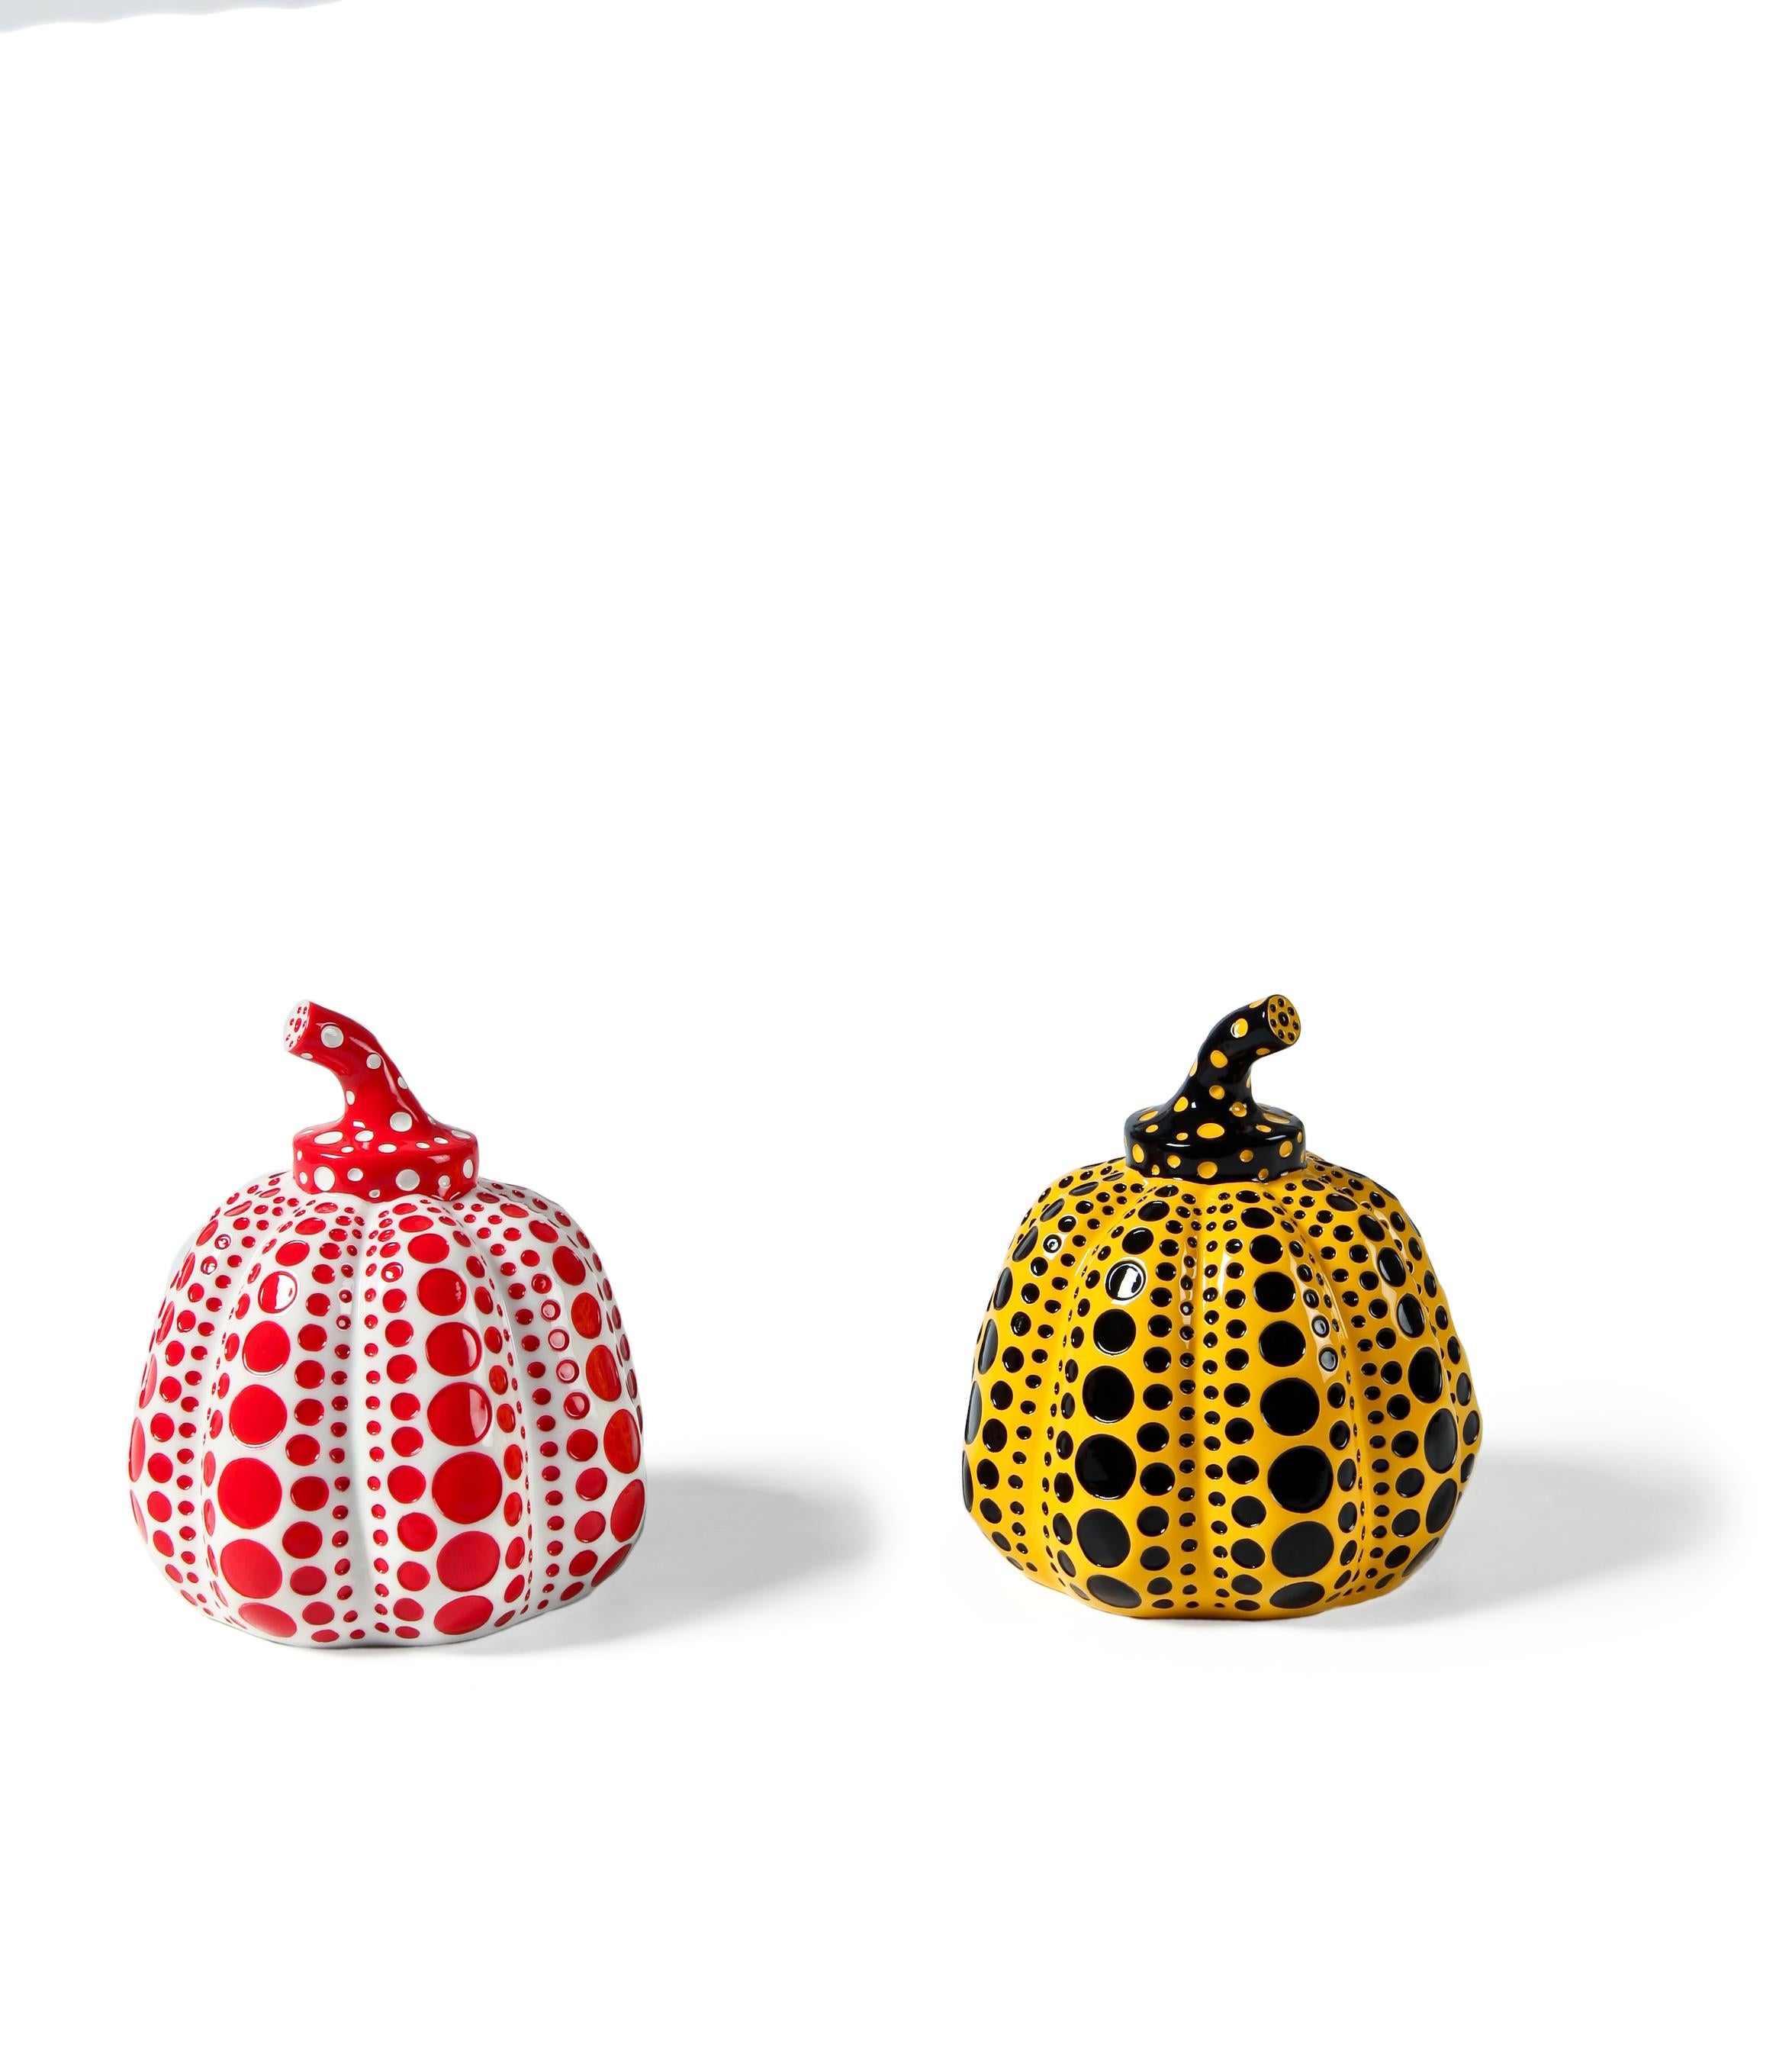 Pumpkin Objects (Pair White & Yellow) -- Sculptures, multiples by Yayoi Kusama 3